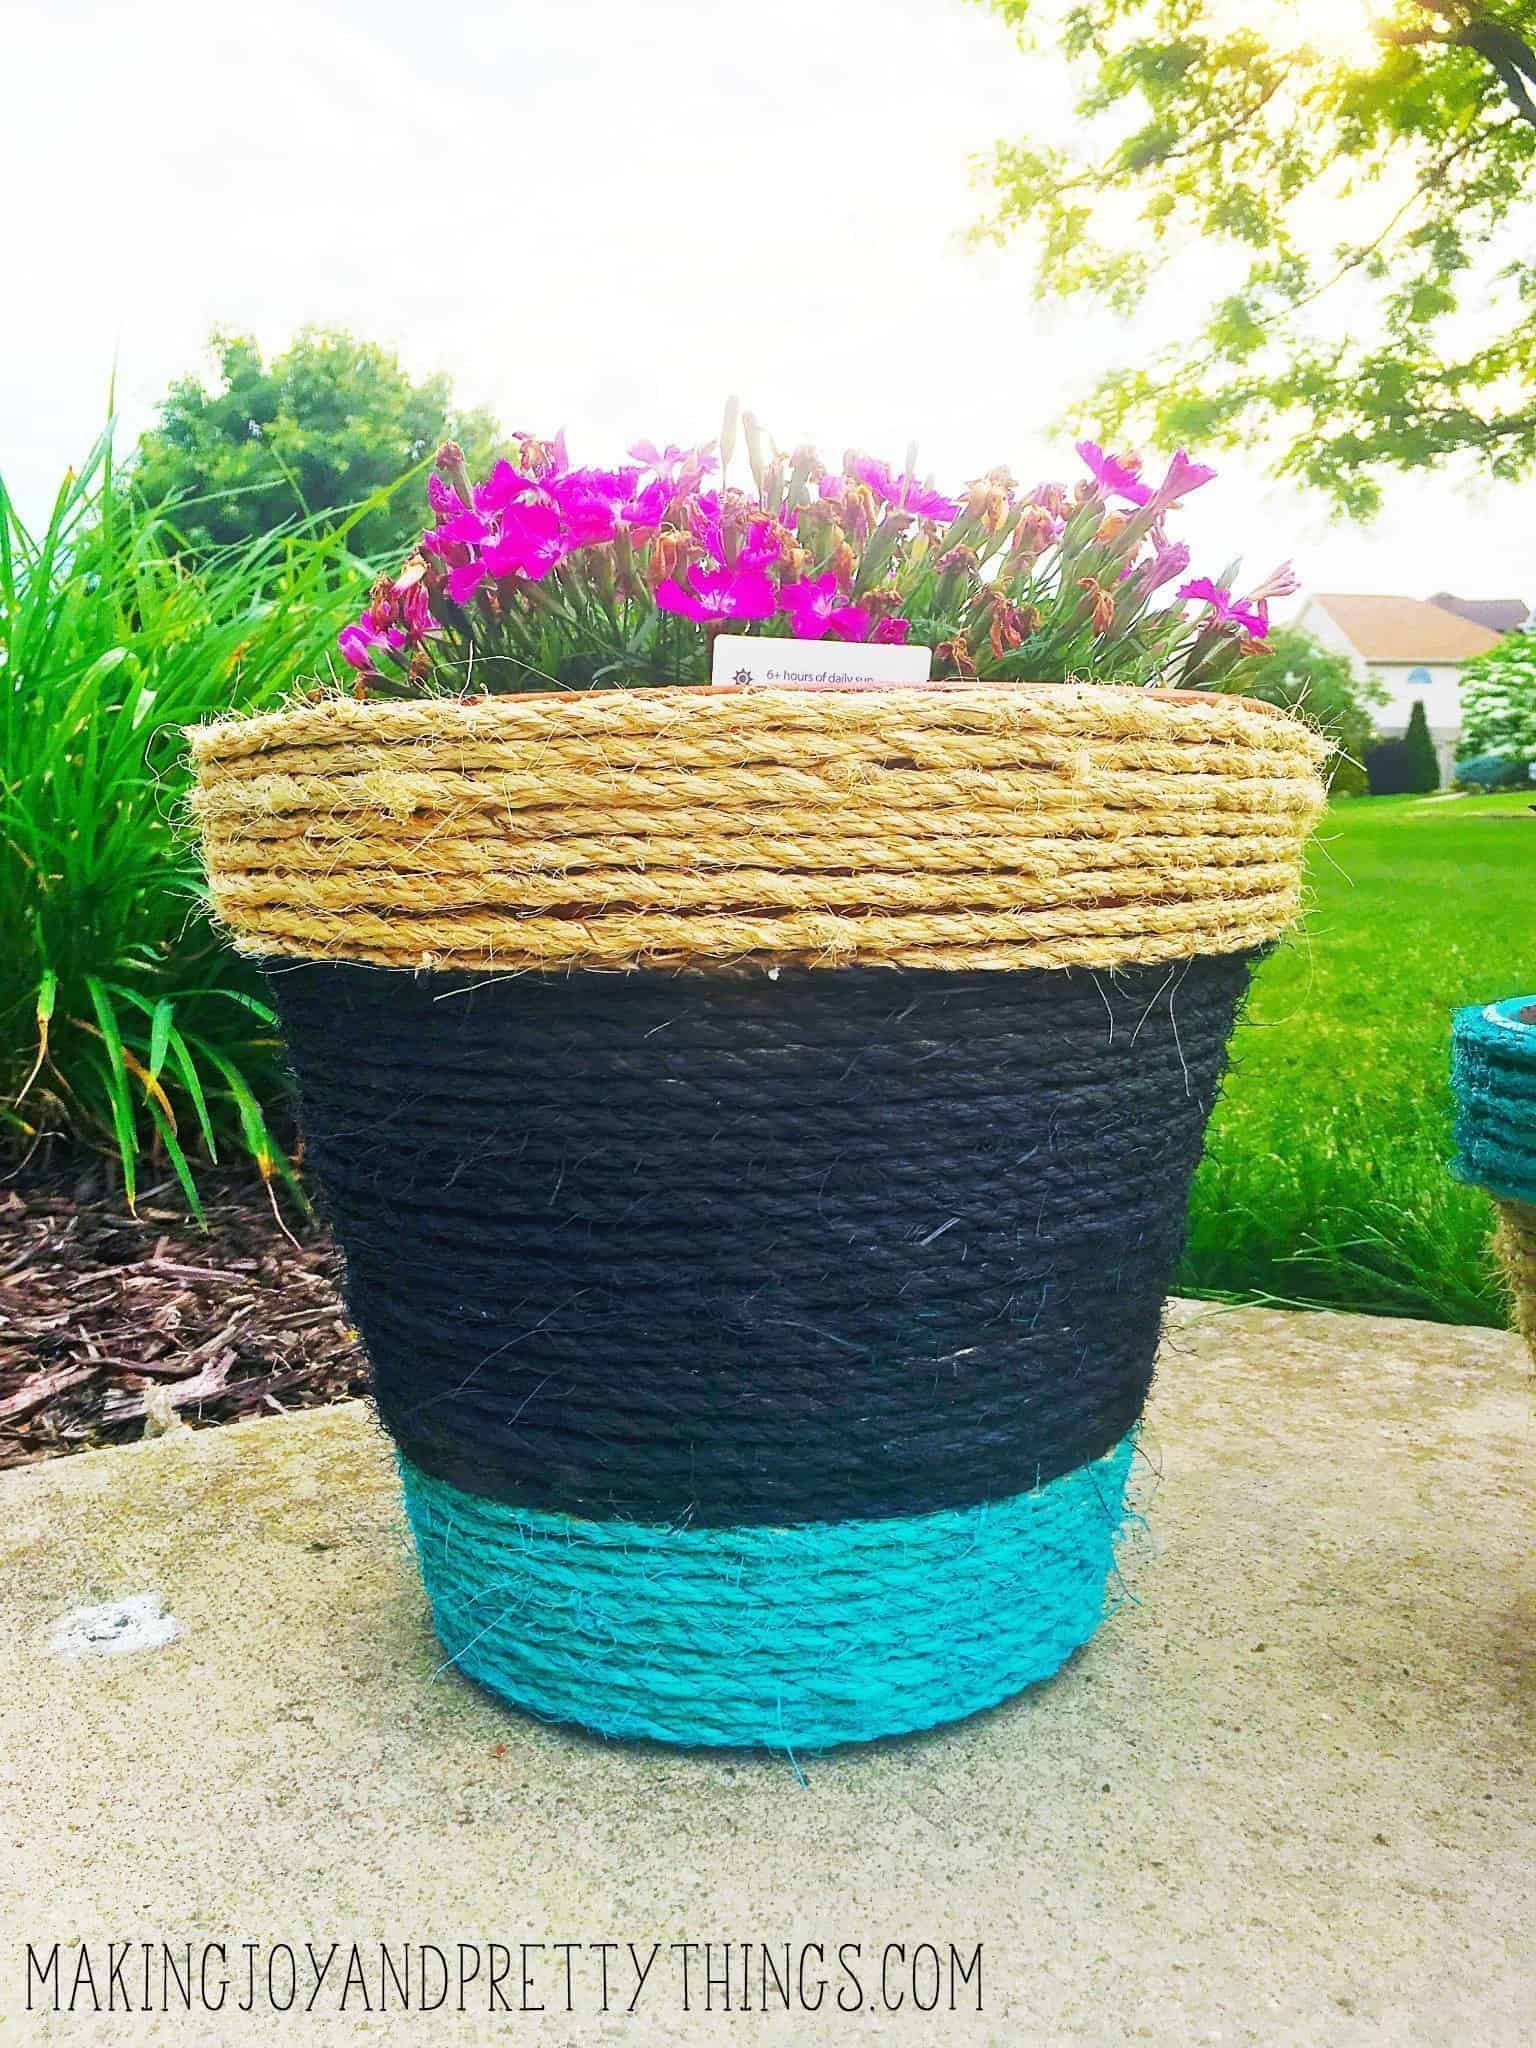 Rope wrapped and painted DIY planters. Perfect easy DIY to kick off summer. Can be customized with any color to compliment your garden area. Makes a great DIY gift.